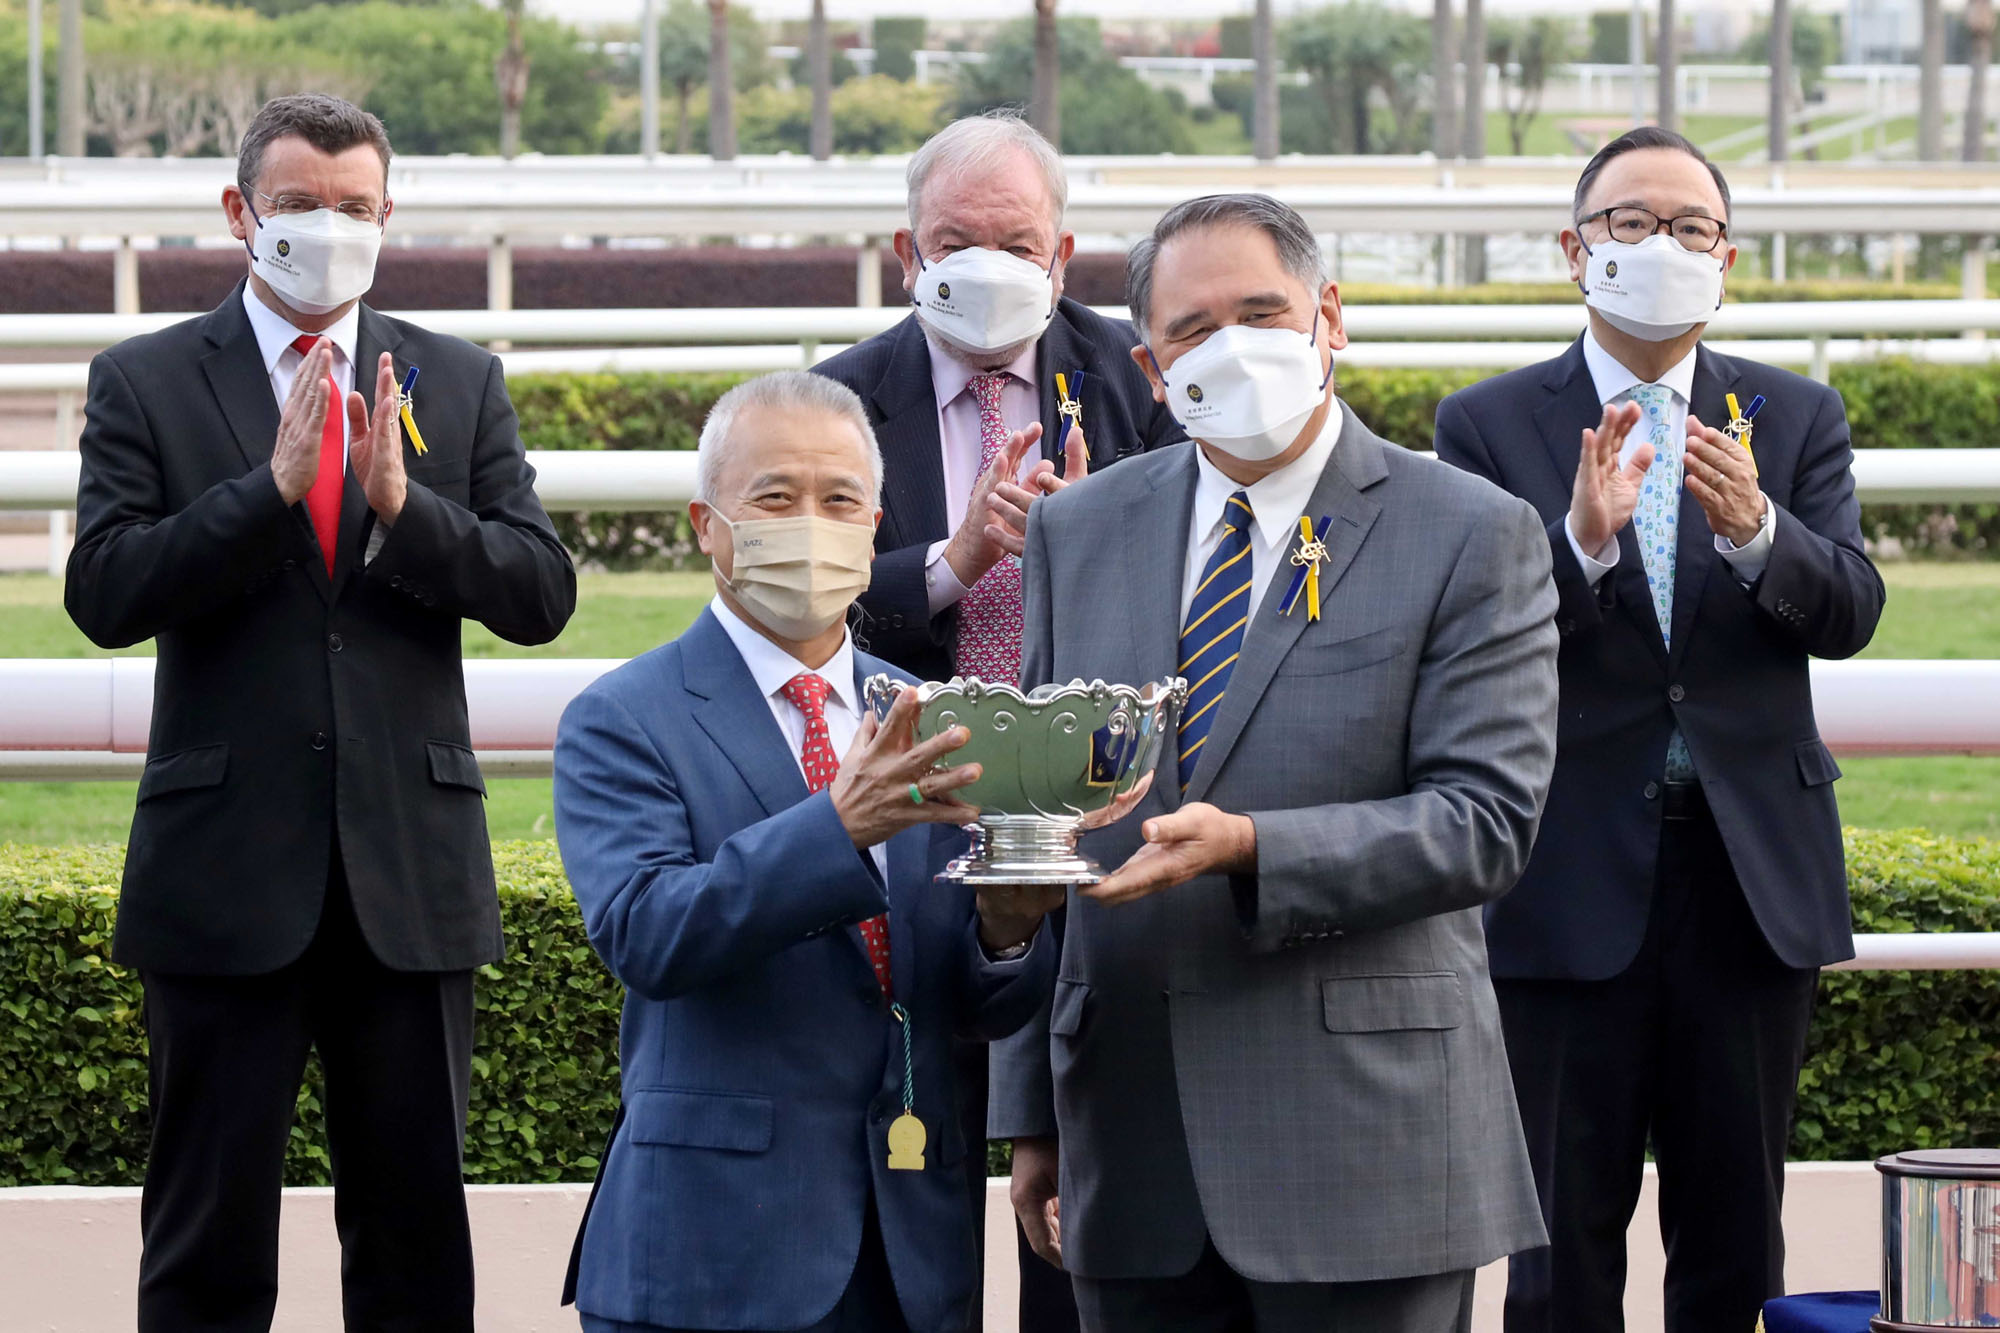 Mr Lester G Huang(right), Steward of the Club, presents the Premier Bowl Trophy and silver dishes to Wellington’s owner Michael Cheng Wing On and representative, trainer Richard Gibson and jockey Alexis Badel.